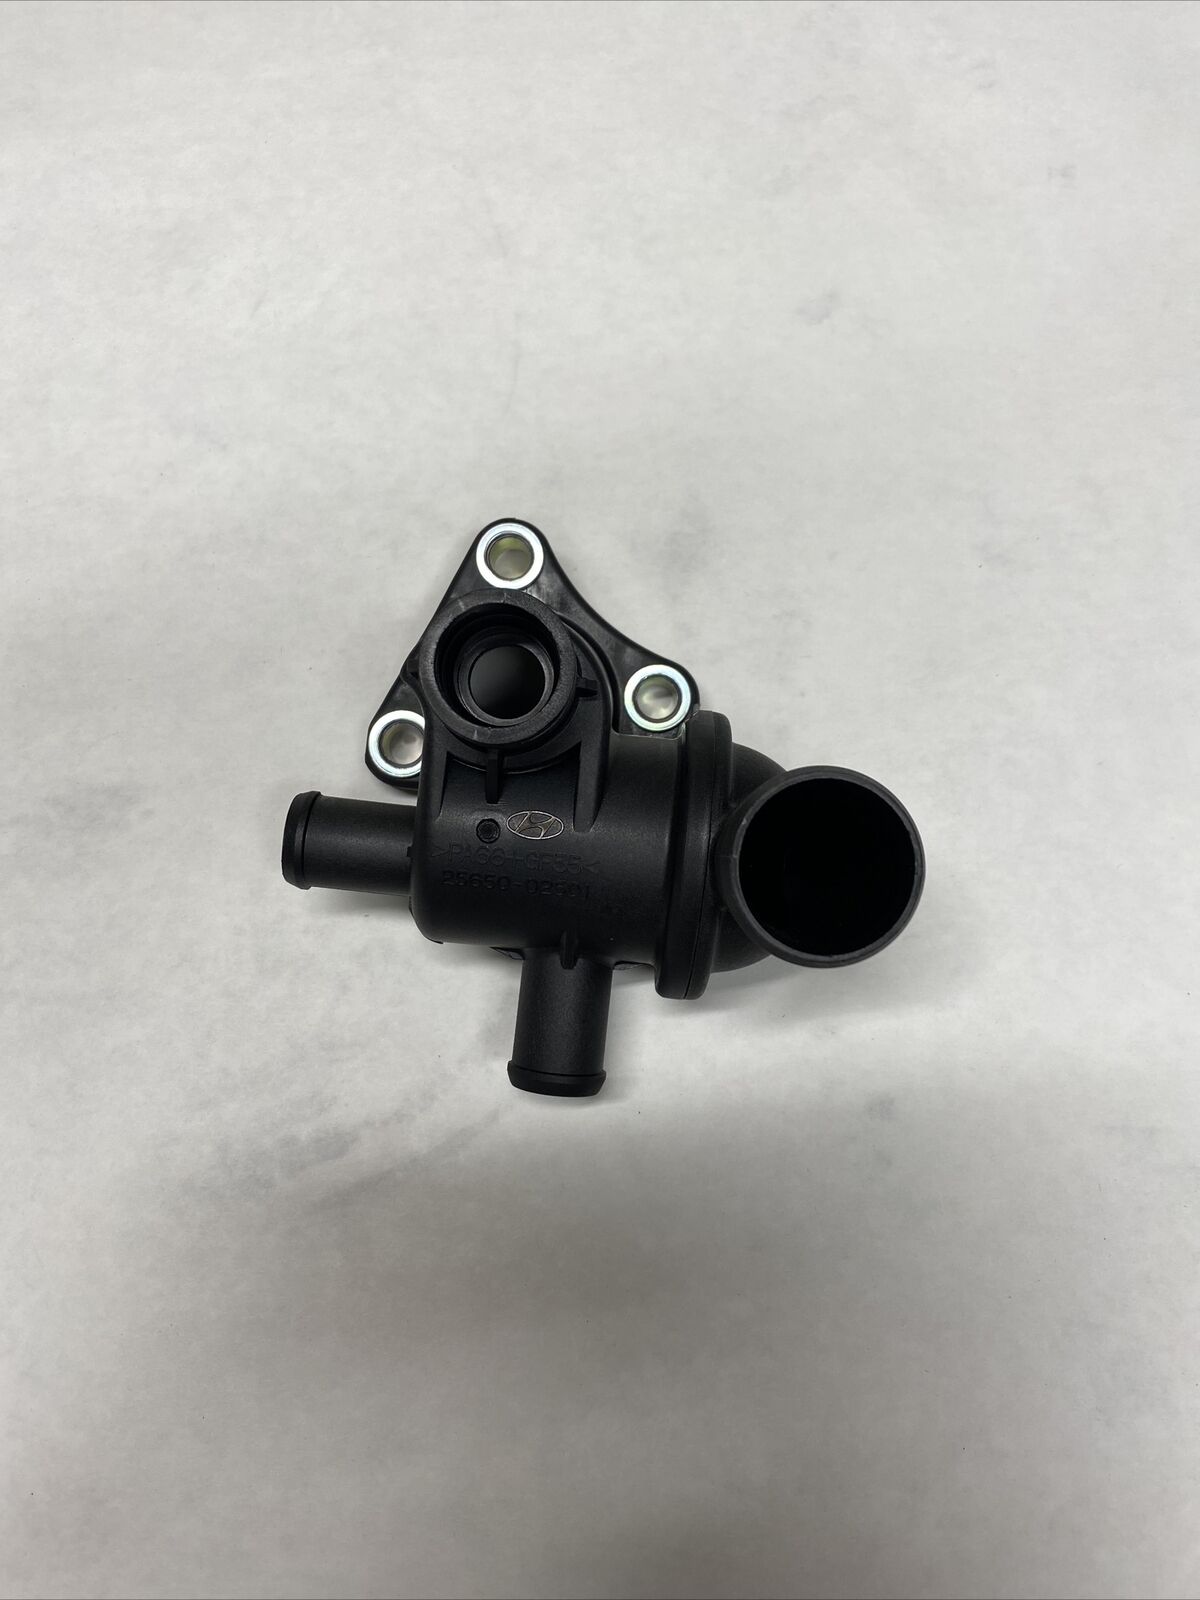 New OEM Kia Fitting Water Outlet 2561102566